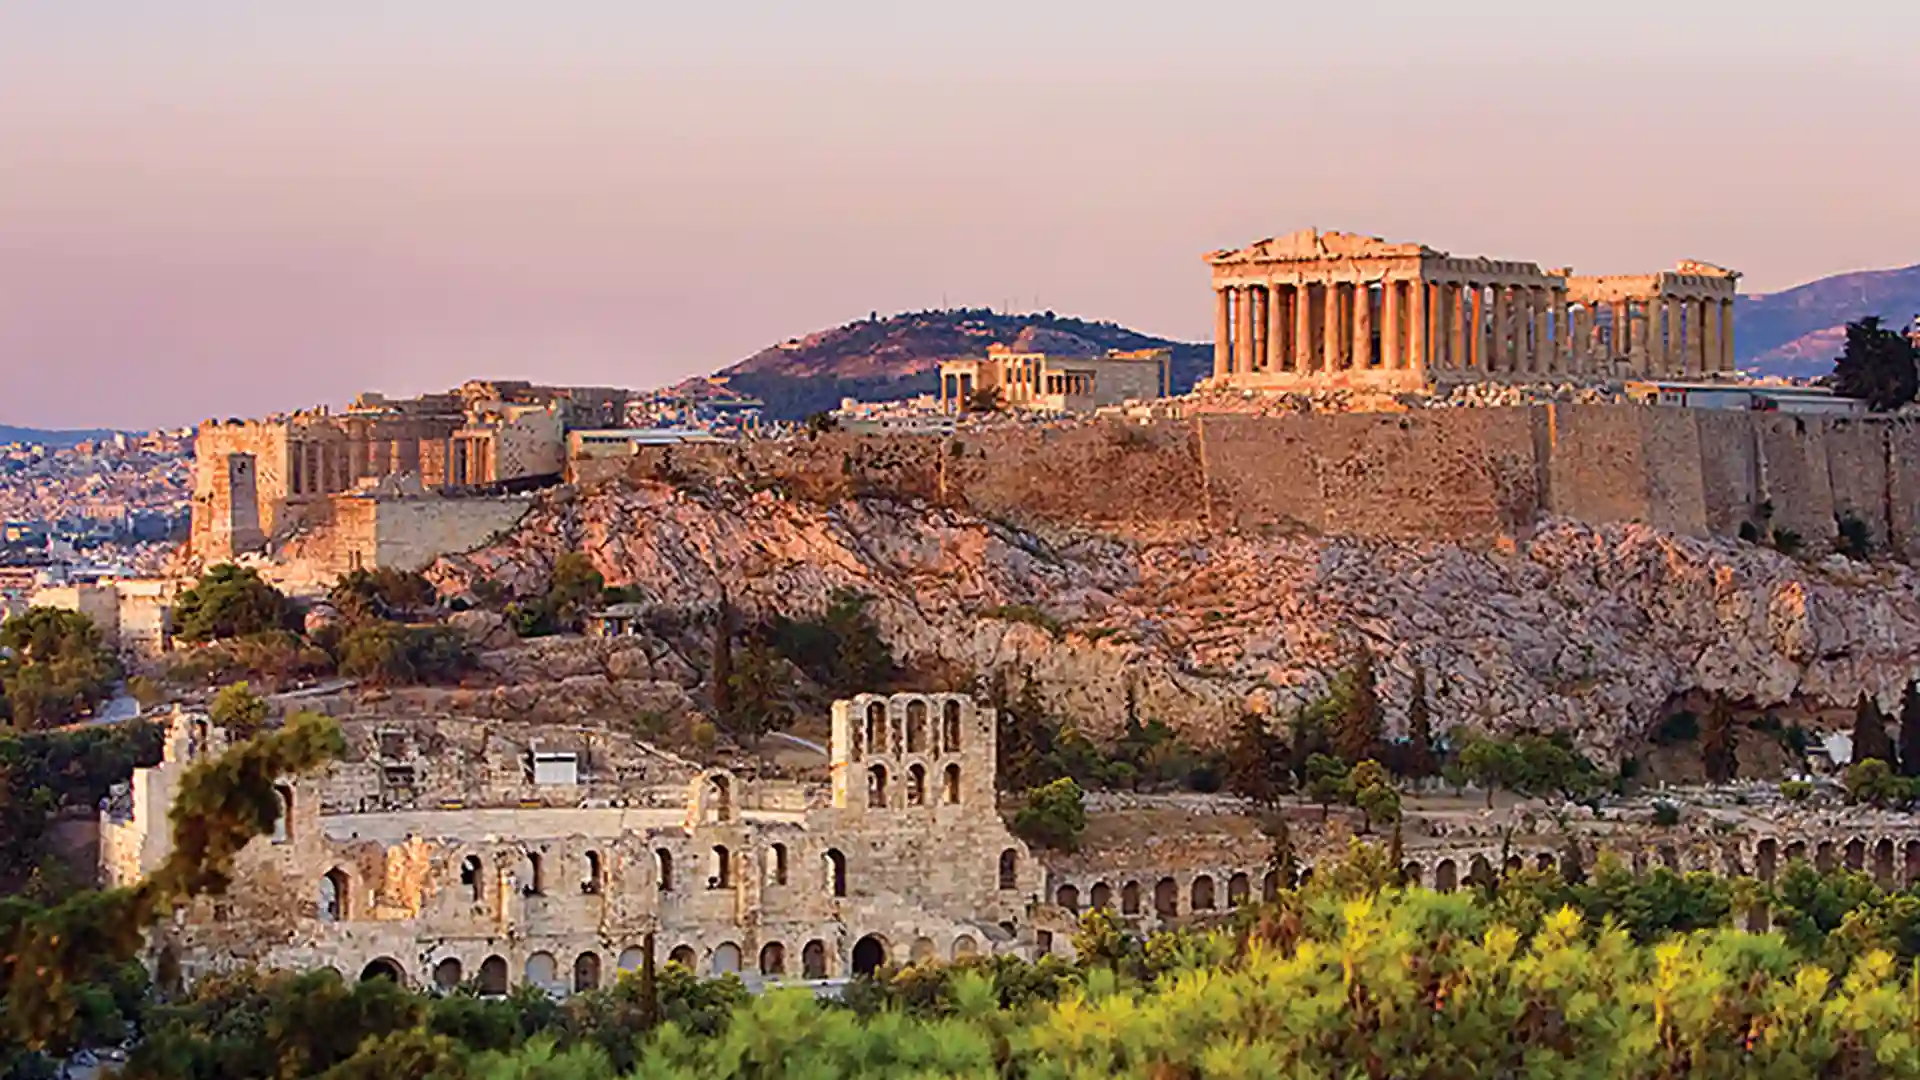 View of acropolis and ancient ruins in Athens, Greece.